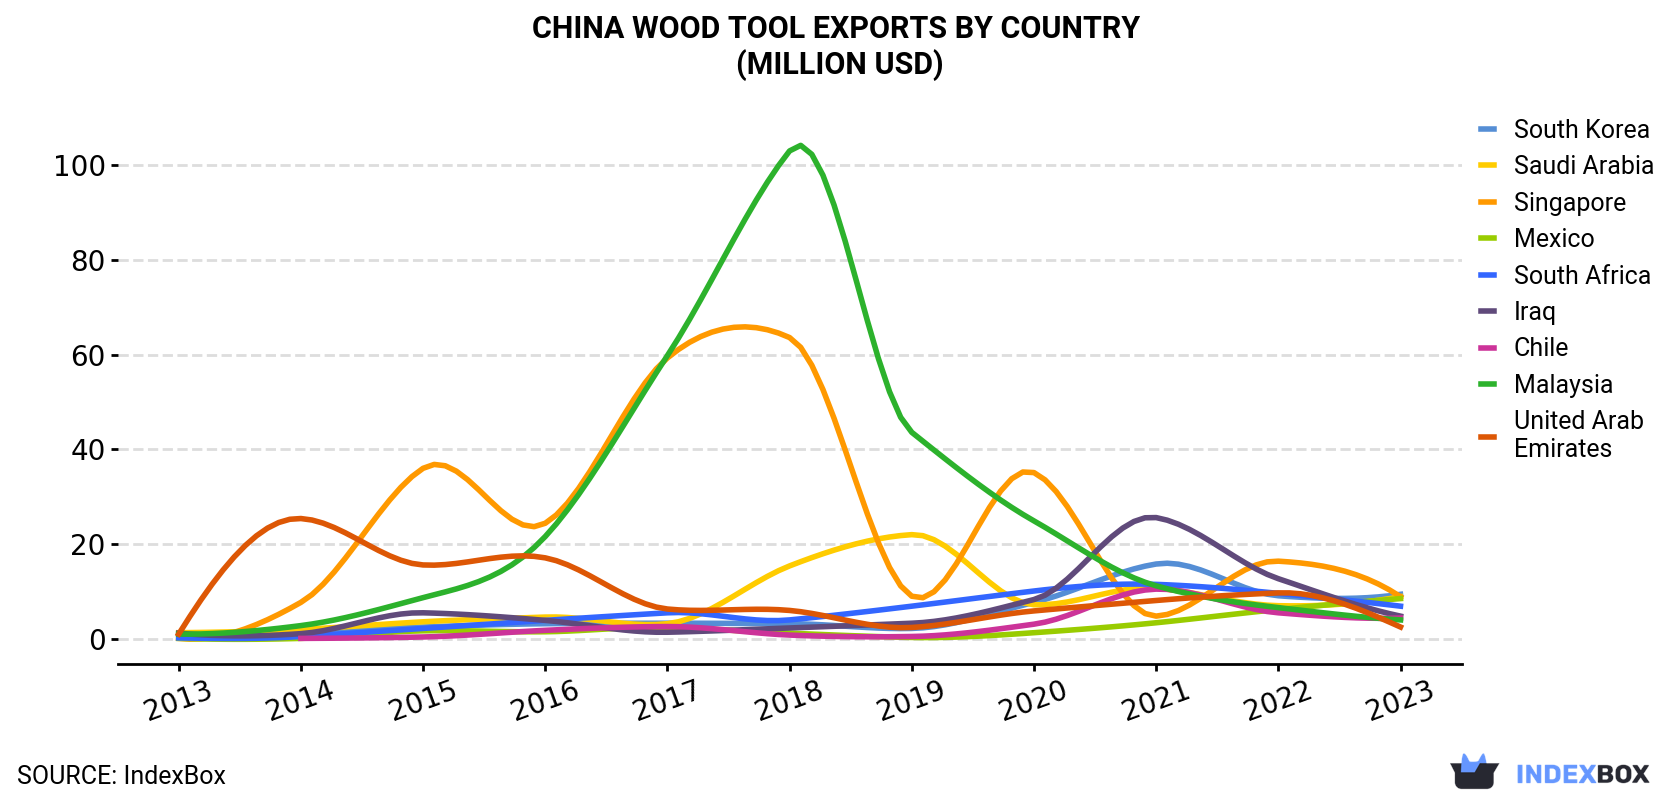 China Wood Tool Exports By Country (Million USD)